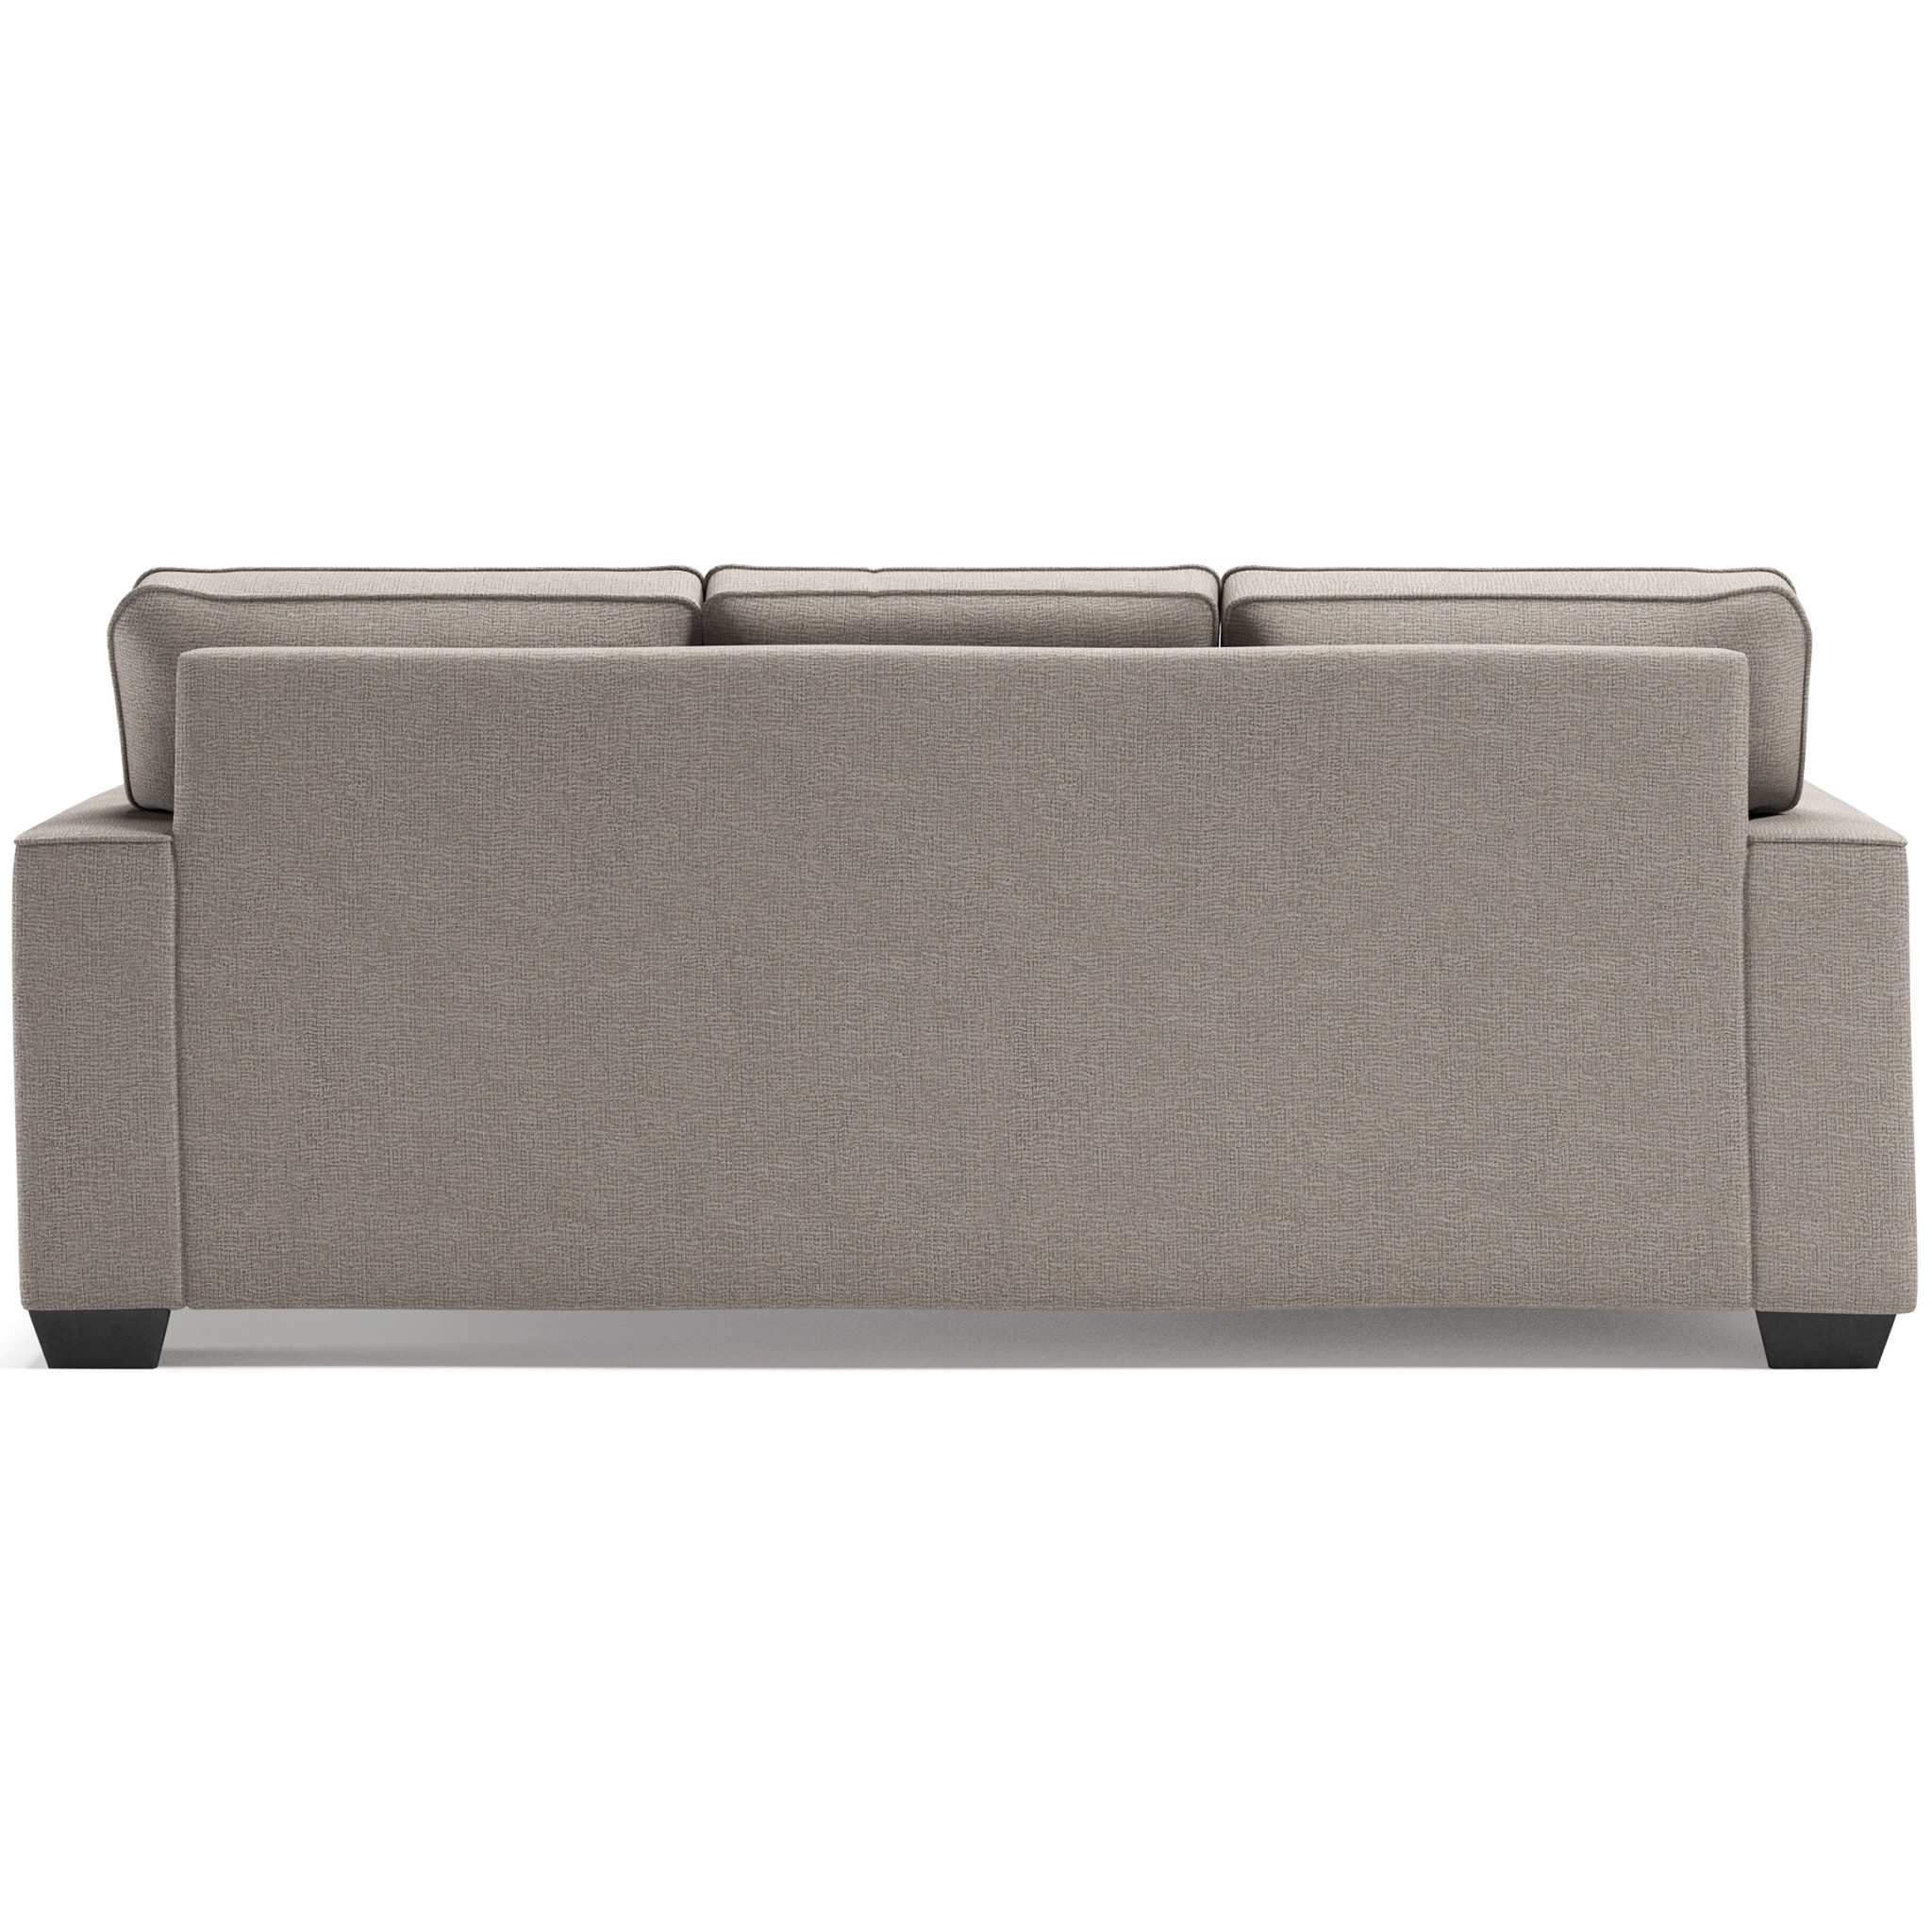 Benchcraft "Greaves" Reversible Sofa Chaise- Stone Color 5510418